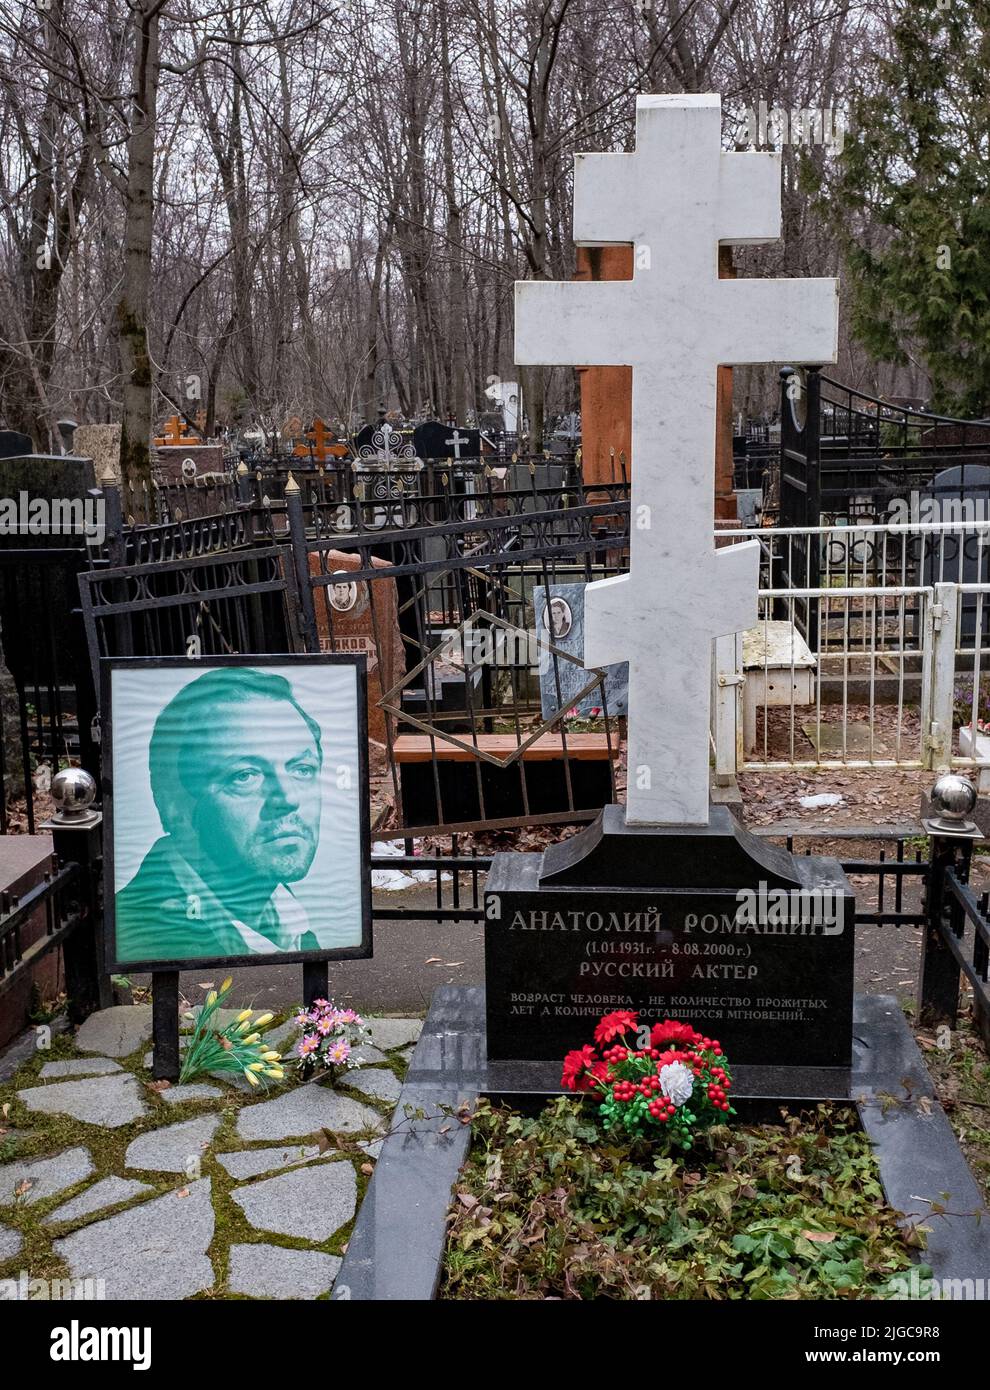 November 27, 2021, Moscow, Russia. Monument at the grave of Soviet actor Anatoly Romashin at the Vagankovsky cemetery in Moscow. Stock Photo